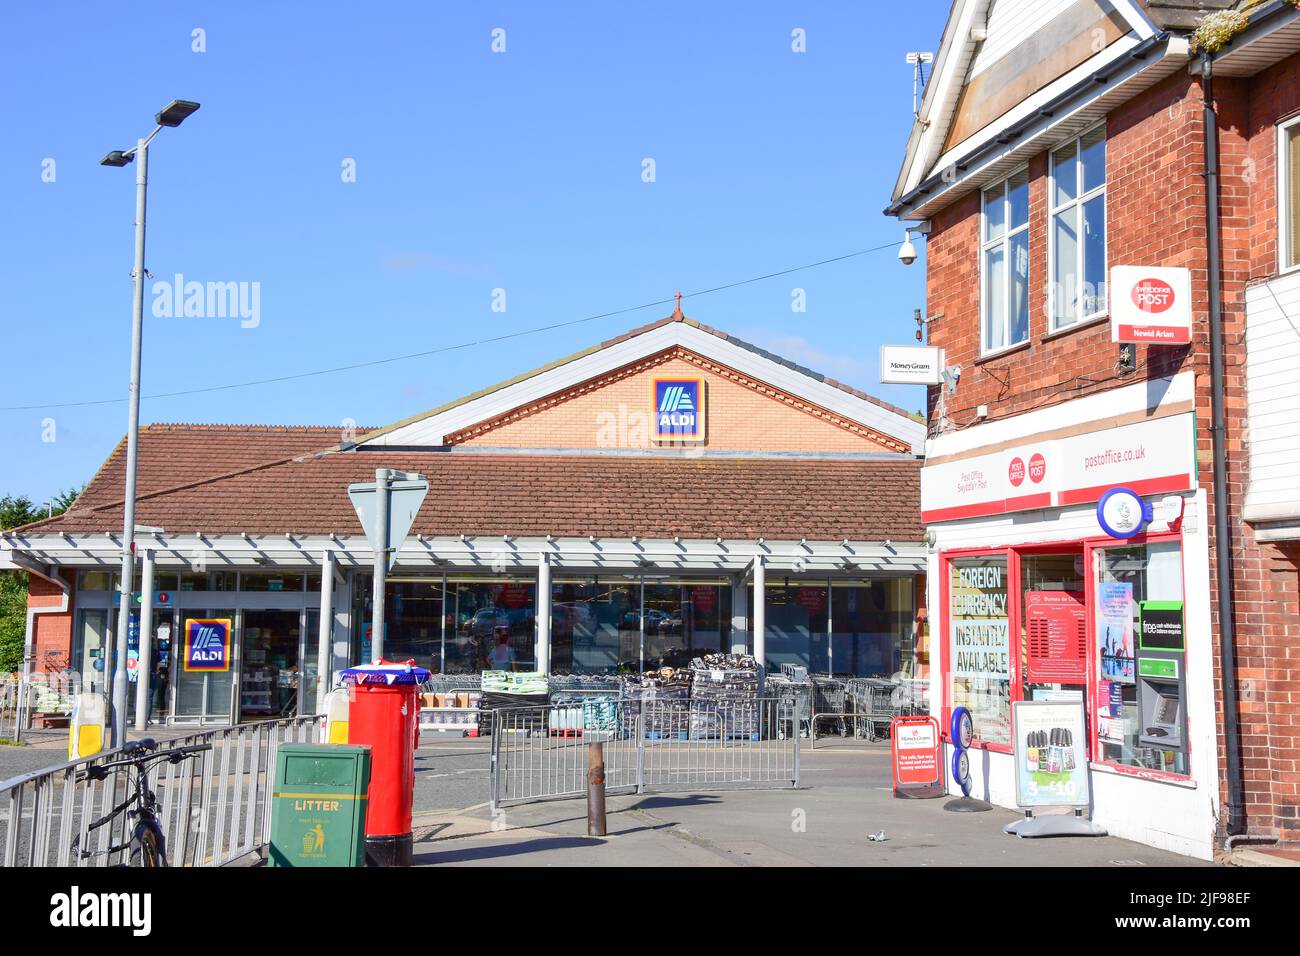 Prestatyn, UK. Jun 22, 2022. Meliden Road has a mixture of residential and commercial properties. The pavement is cluttered with many obstacles Stock Photo